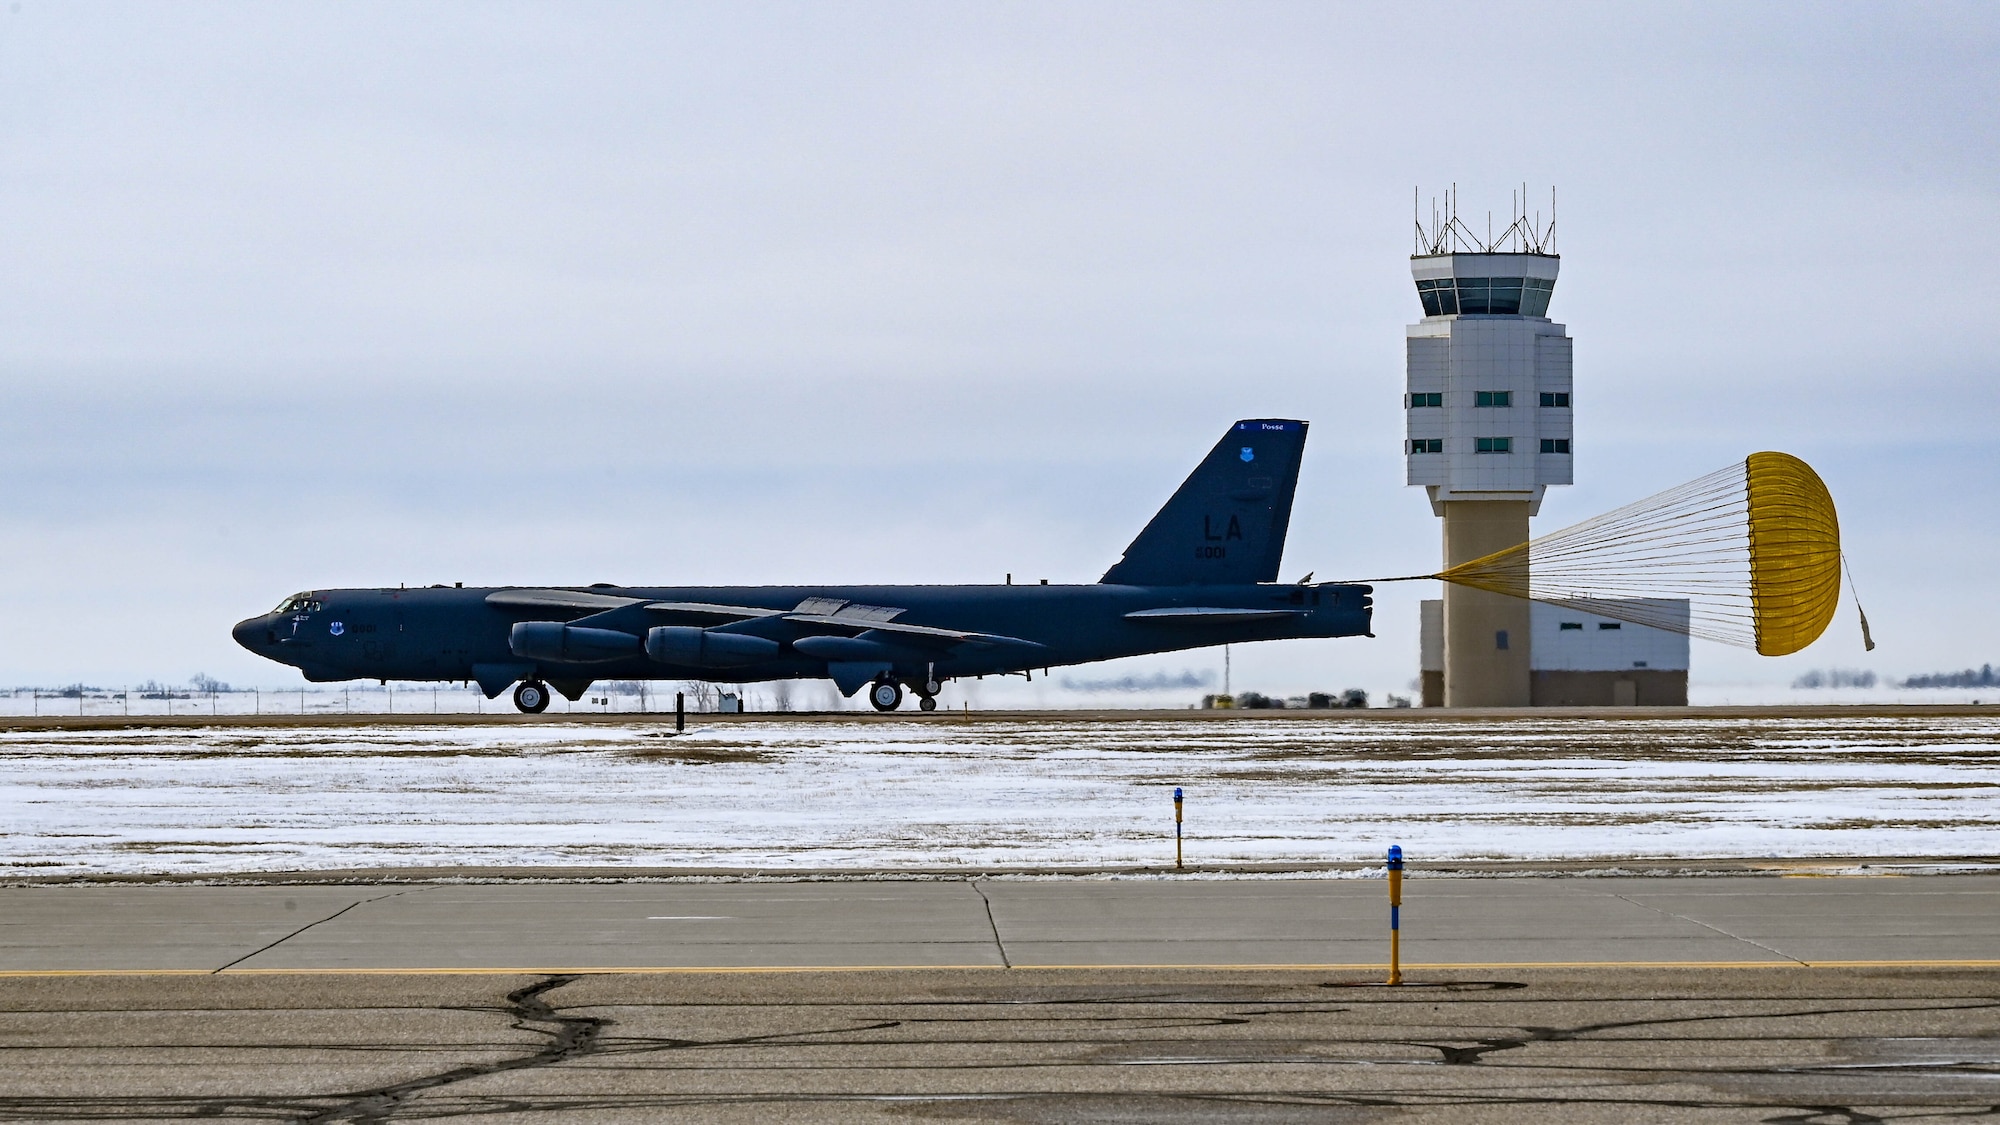 A B-52H Stratofortess assigned to the 2nd Bomb Wing at Barksdale Air Force Base,  L.A., lands at Minot Air Force Base, North Dakota, during the Global Thunder exercise, April 7, 2023. Airmen and aircraft from the 2nd Bomb Wing at Barksdale AFB, LA integrated with 5th Bomb Wing personnel at Minot AFB, to conduct combined B-52H Stratofortress planning, maintenance, security, logistics, and operations in support of  GT23. (U.S. Air Force photo by Senior Airman Zachary Wright)